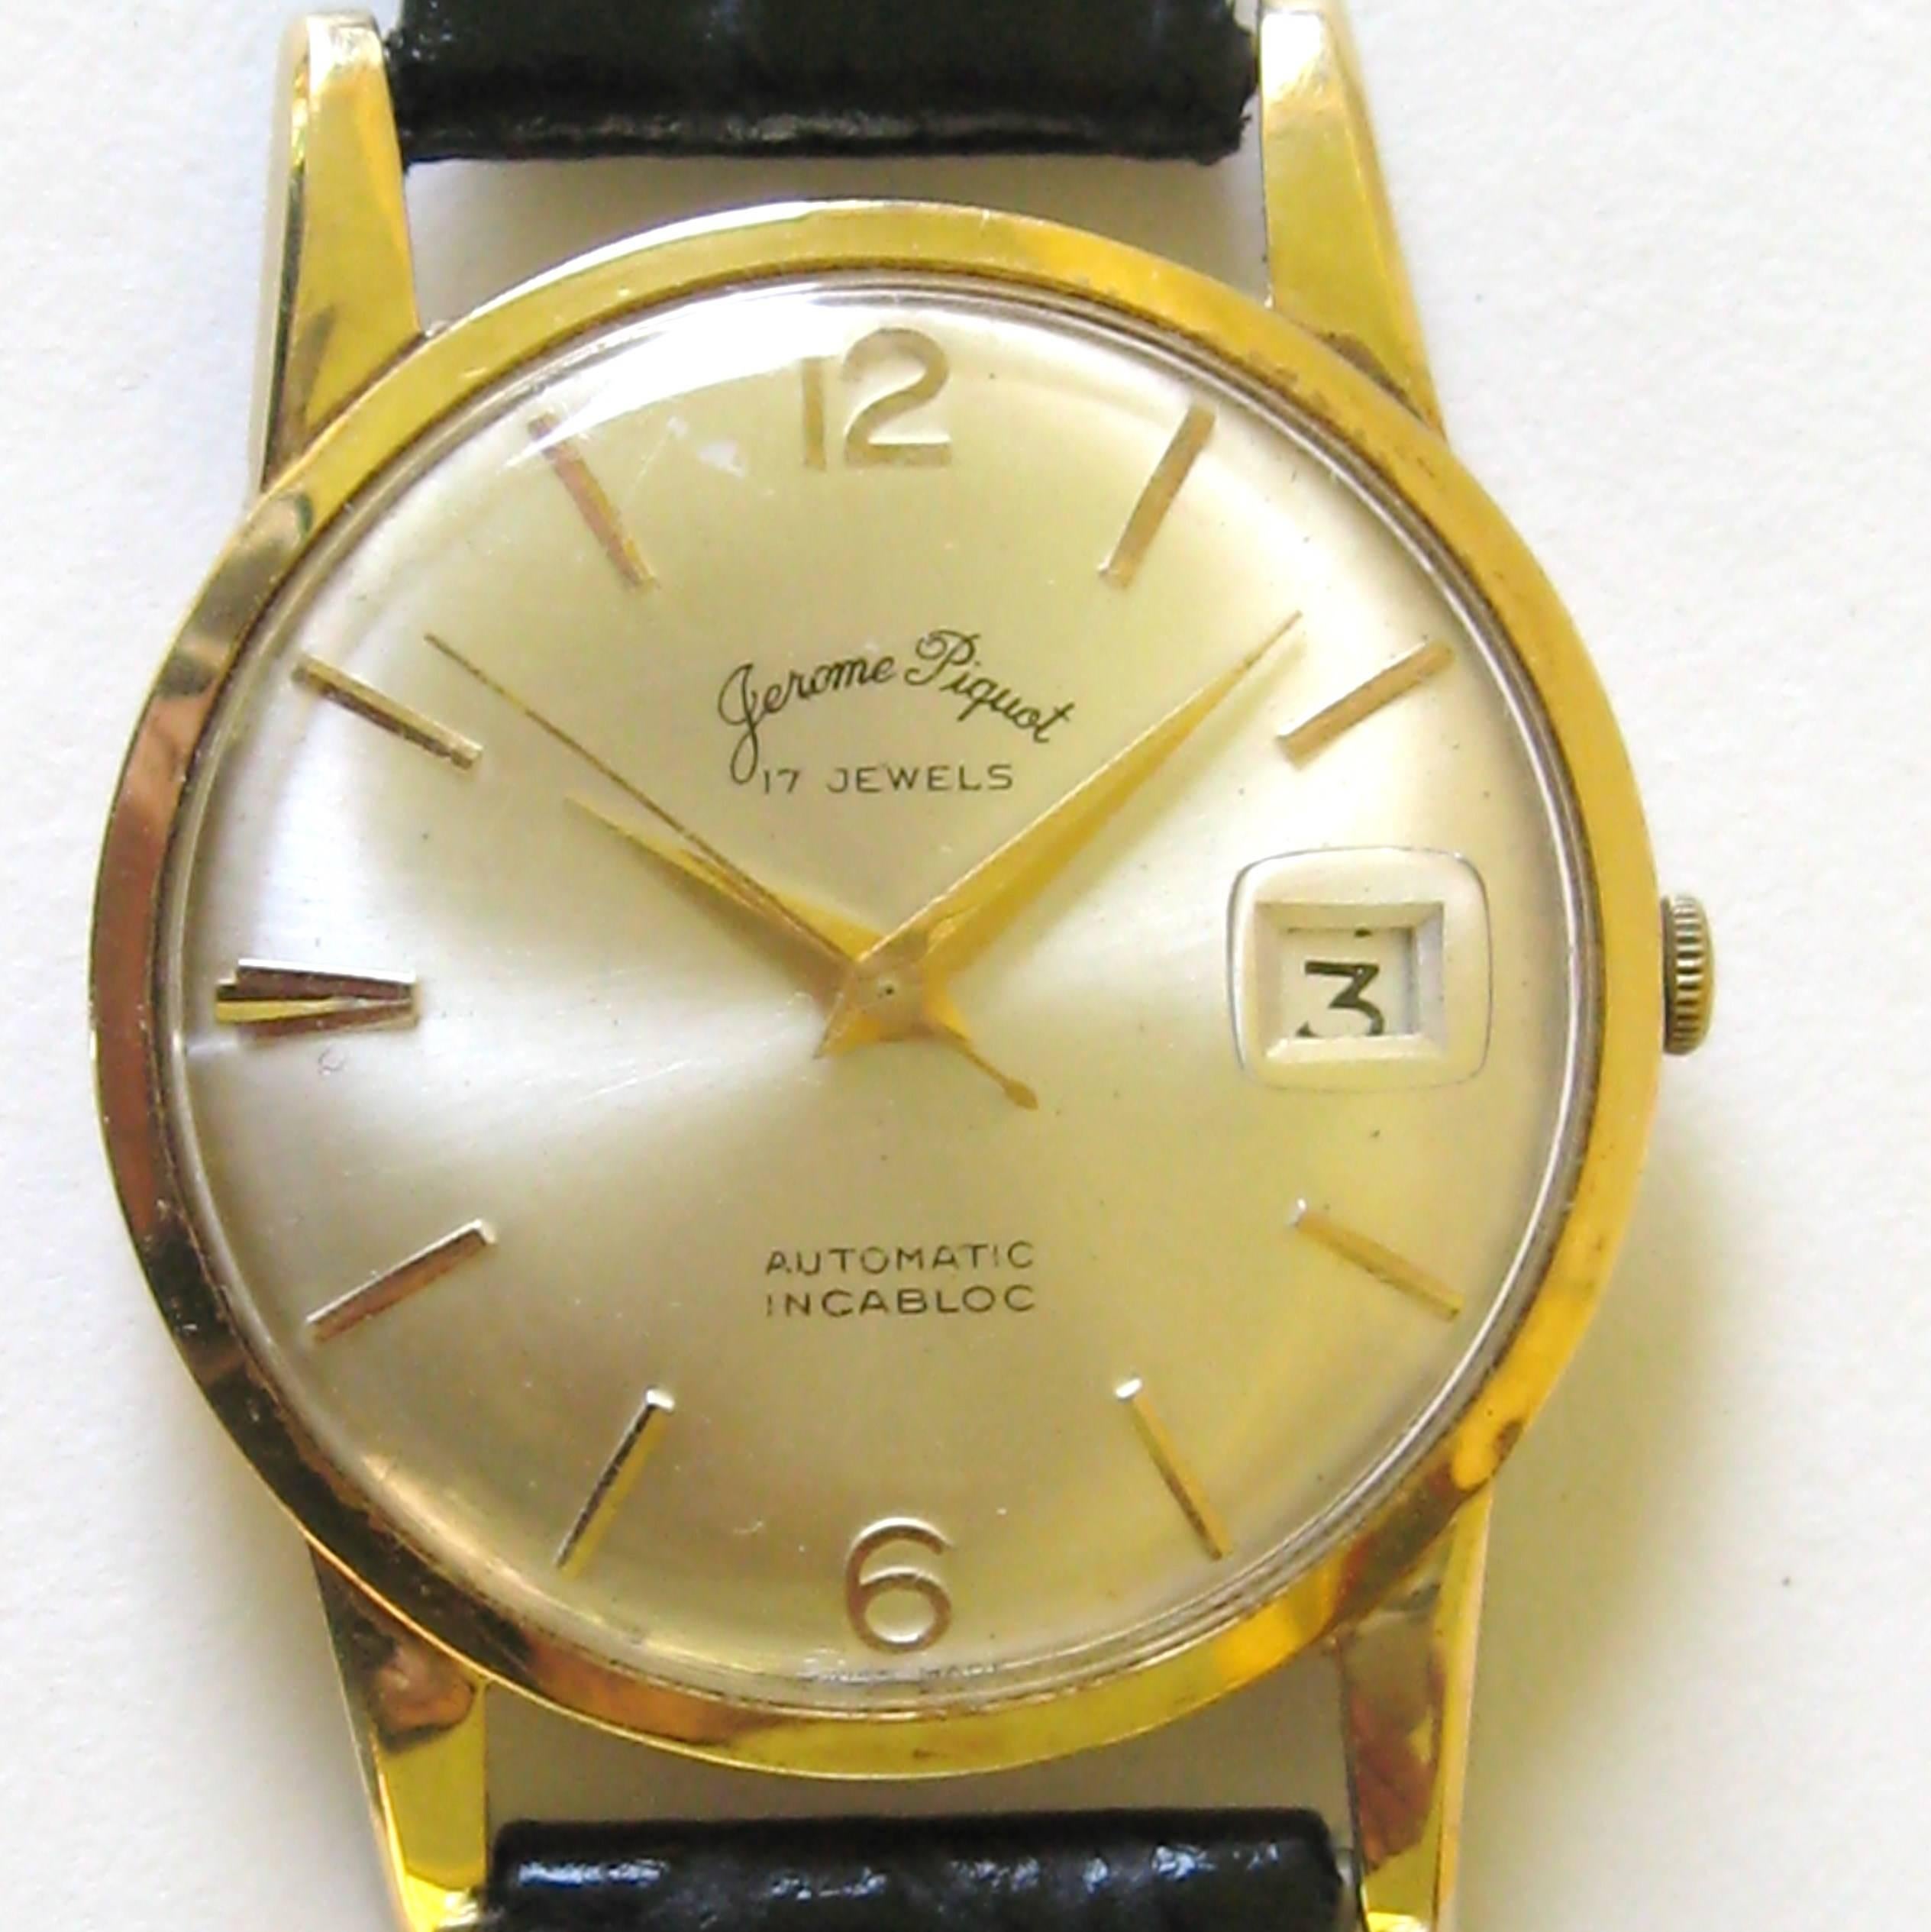 Jerome Piquot 14k yellow gold wristwatch with date and sweep center seconds, 17 jewels automatic movement with Incabloc. Leather band. Watch is approximately 1.39 inches in circumference. Watch is in working condition. Please check our storefront